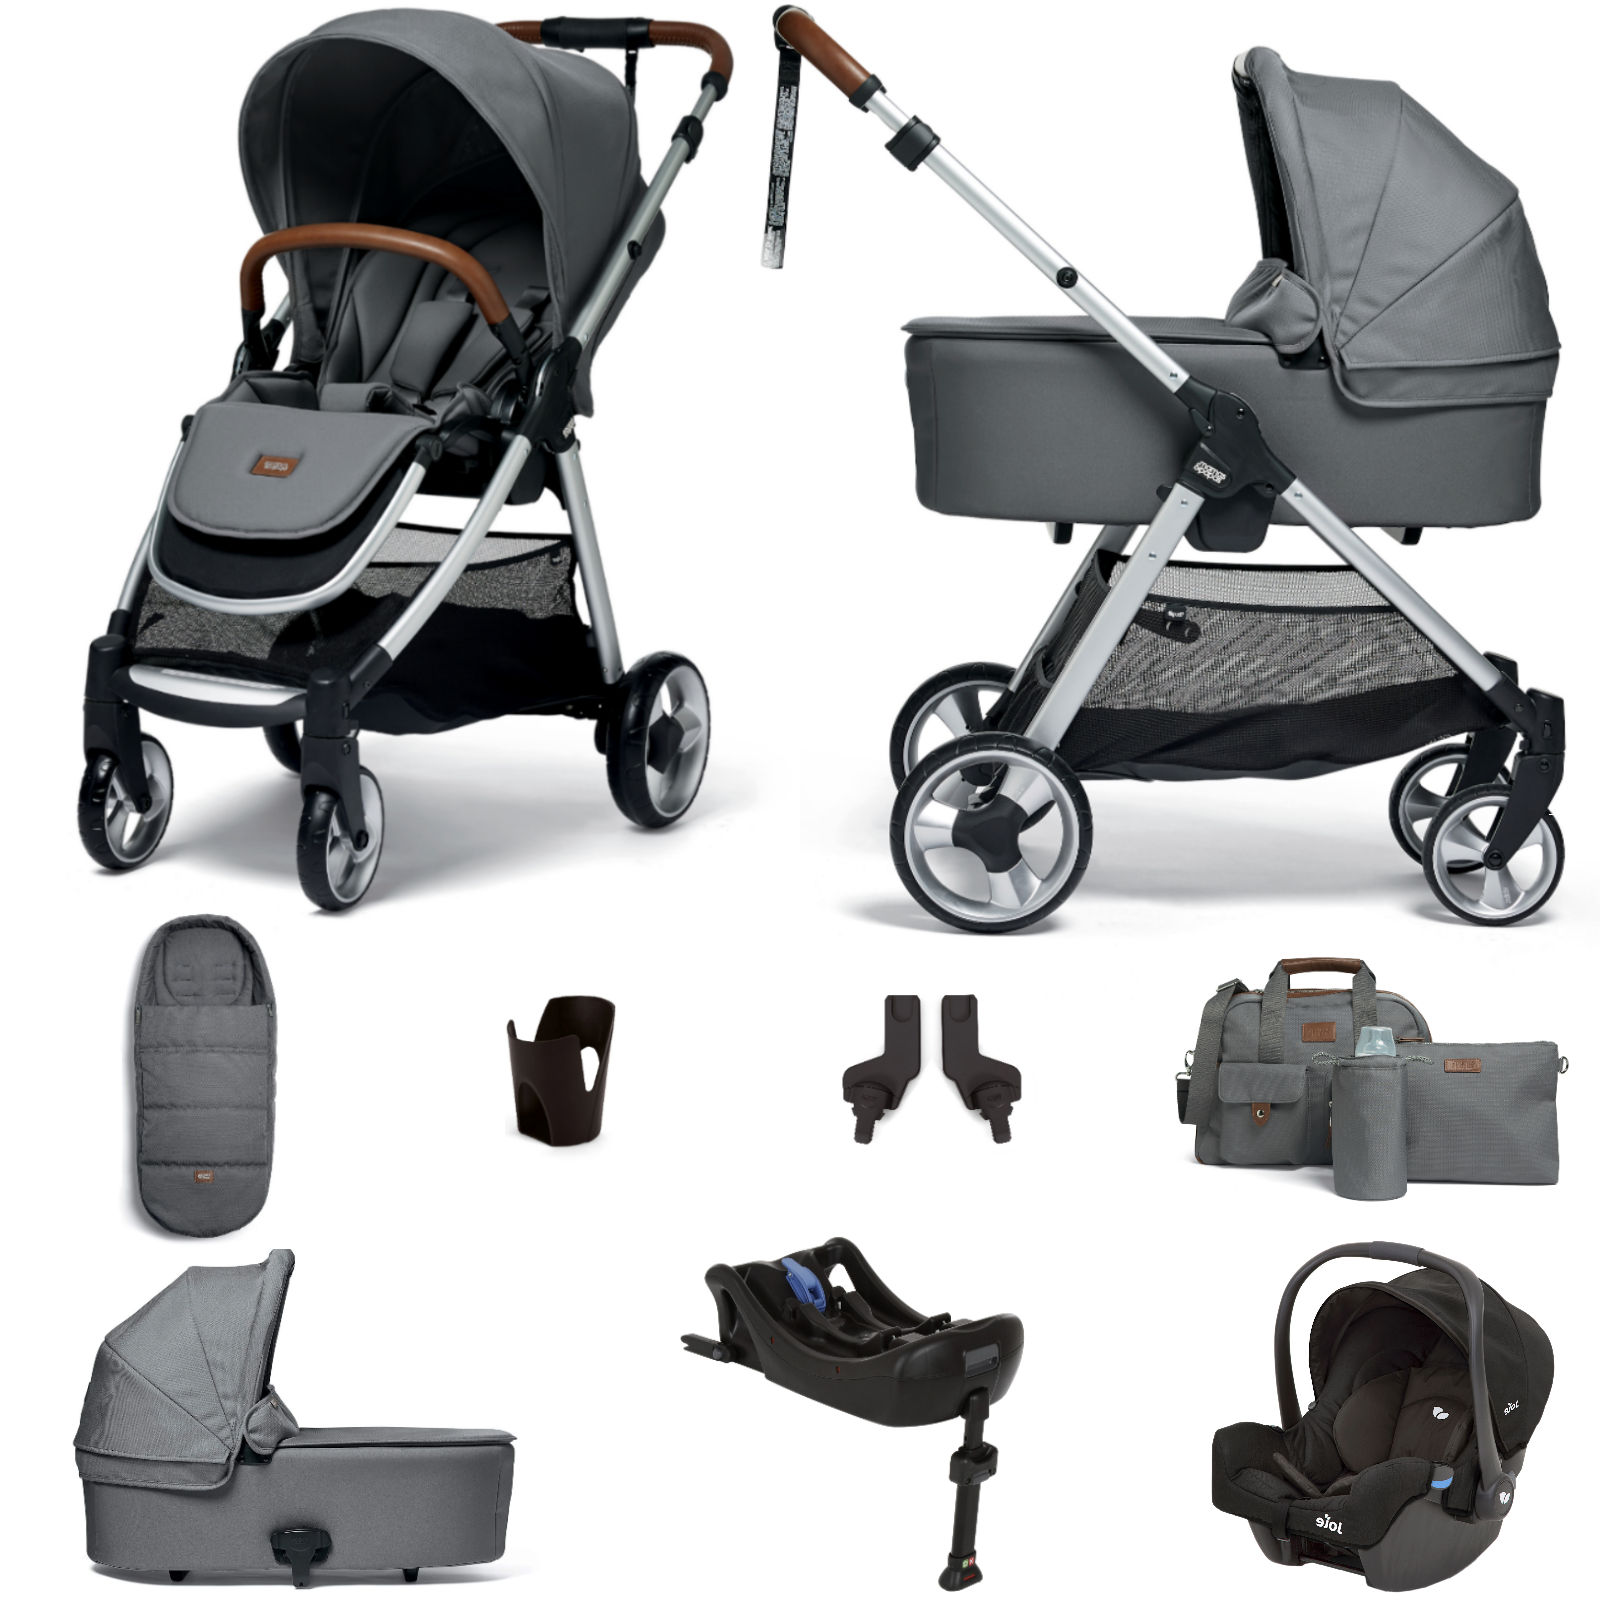 Mamas & Papas Flip XT2 8pc Essentials (Gemm Car Seat) Travel System with Carrycot & ISOFIX Base - Fossil Grey...